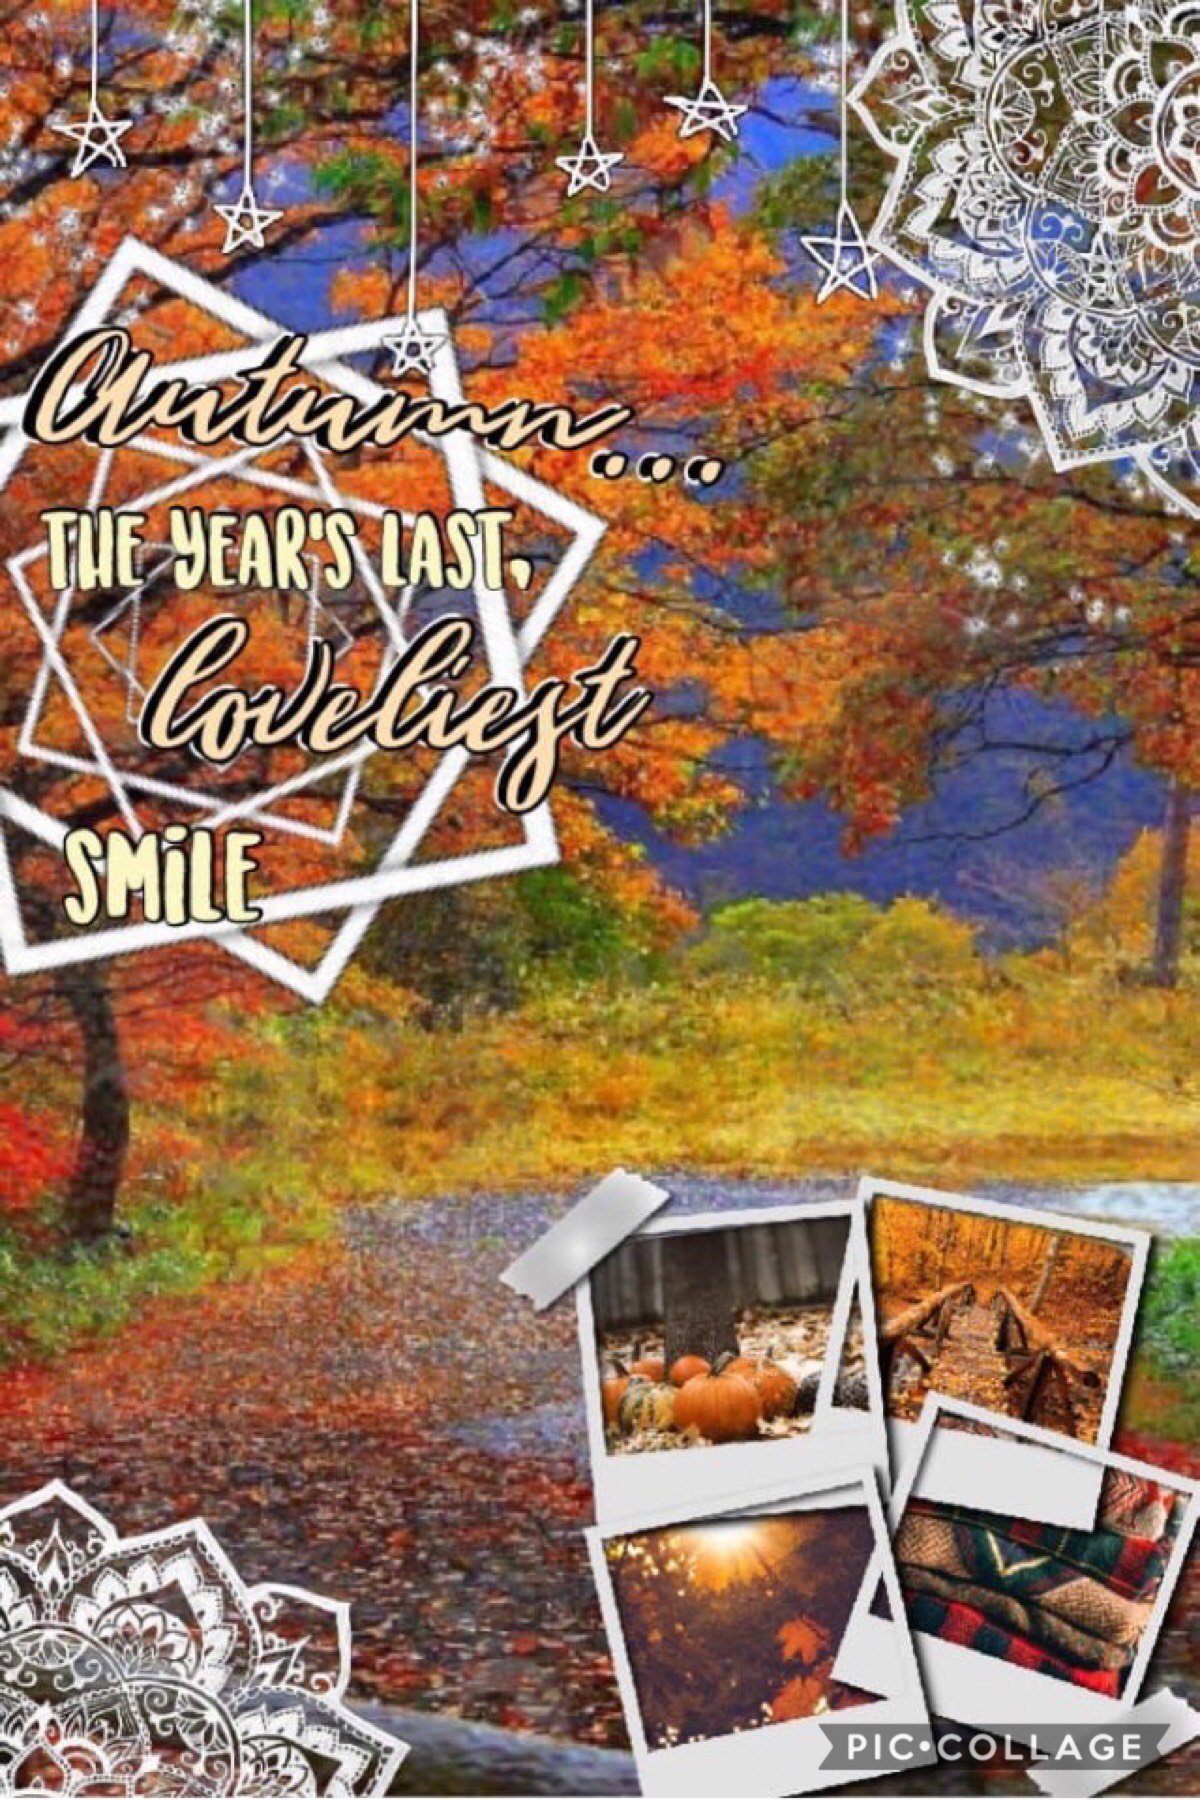 Collab with DeepDreamers! 🍂🍁I did text, she did background, and we both did pngs!😊Please go follow this amazing user! She’s soo nice, organized, and talented! I love fall! QOTD:fave fall scent AOTD:apple cider or cinnamon sweet pumpkin 🎃 